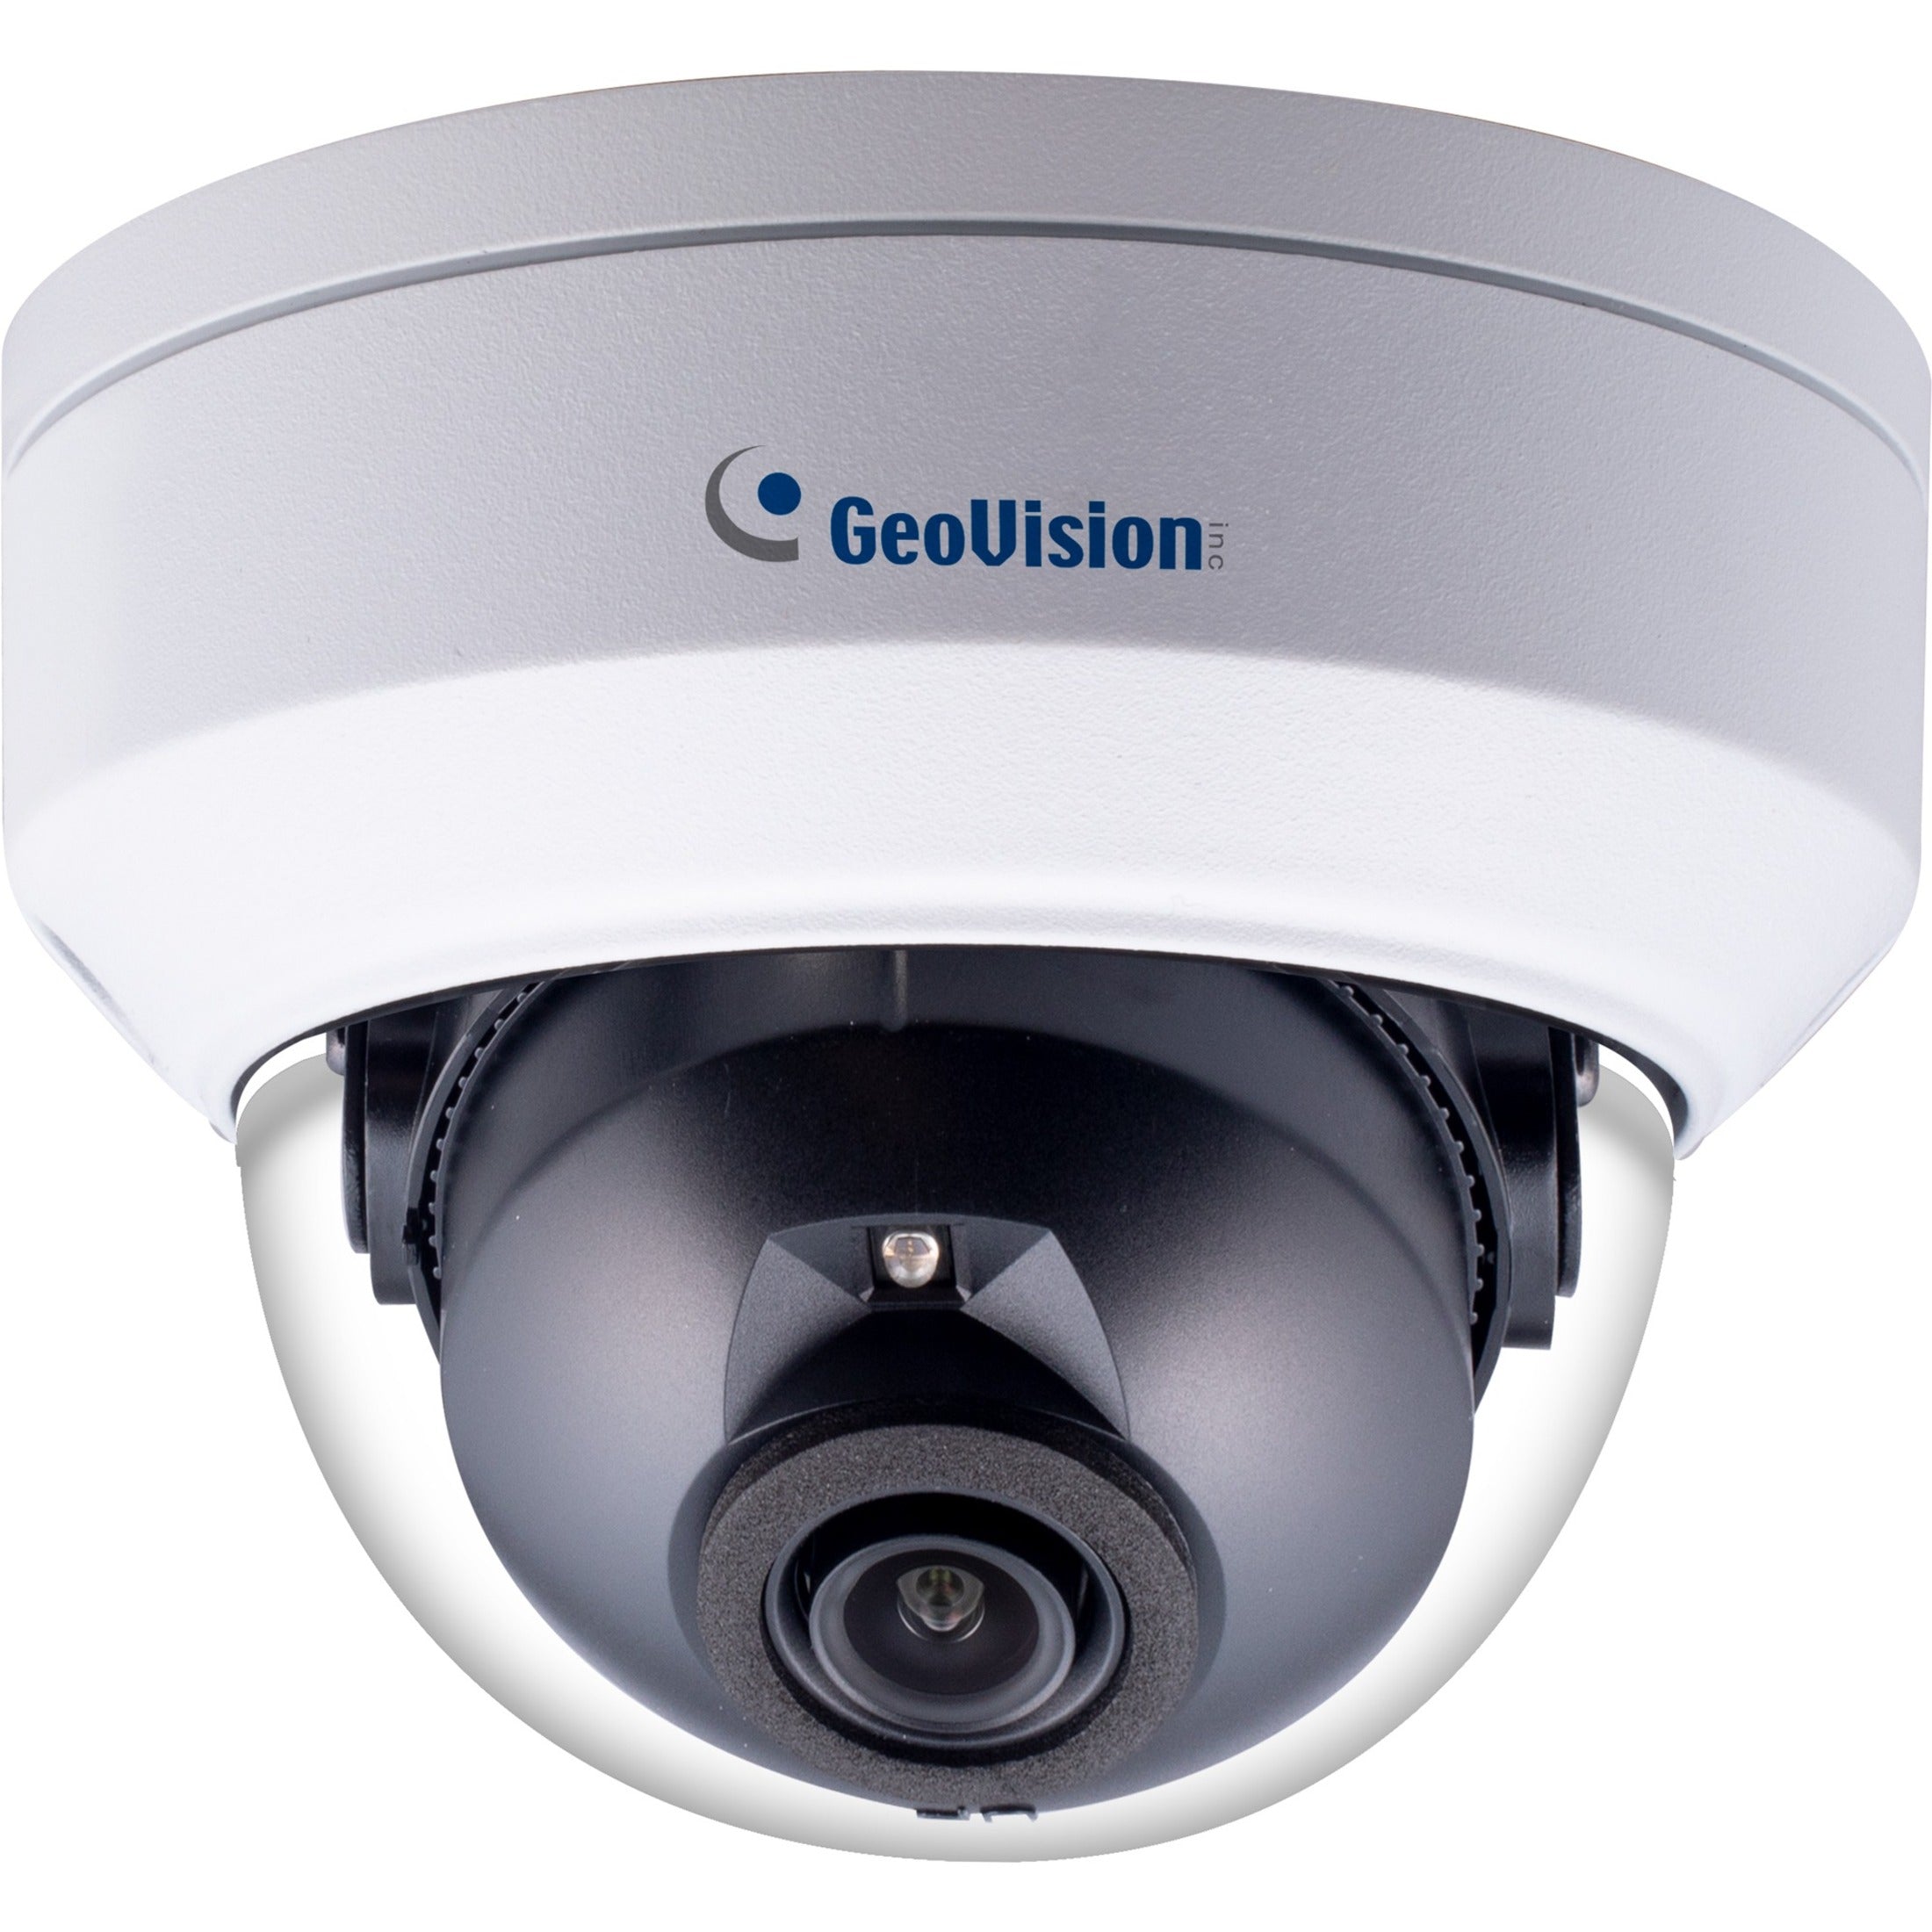 GeoVision GV-TDR4803 AI 4MP Super Low Lux WDR Pro IR Mini Dome, Outdoor, 2688 x 1520, 30 fps